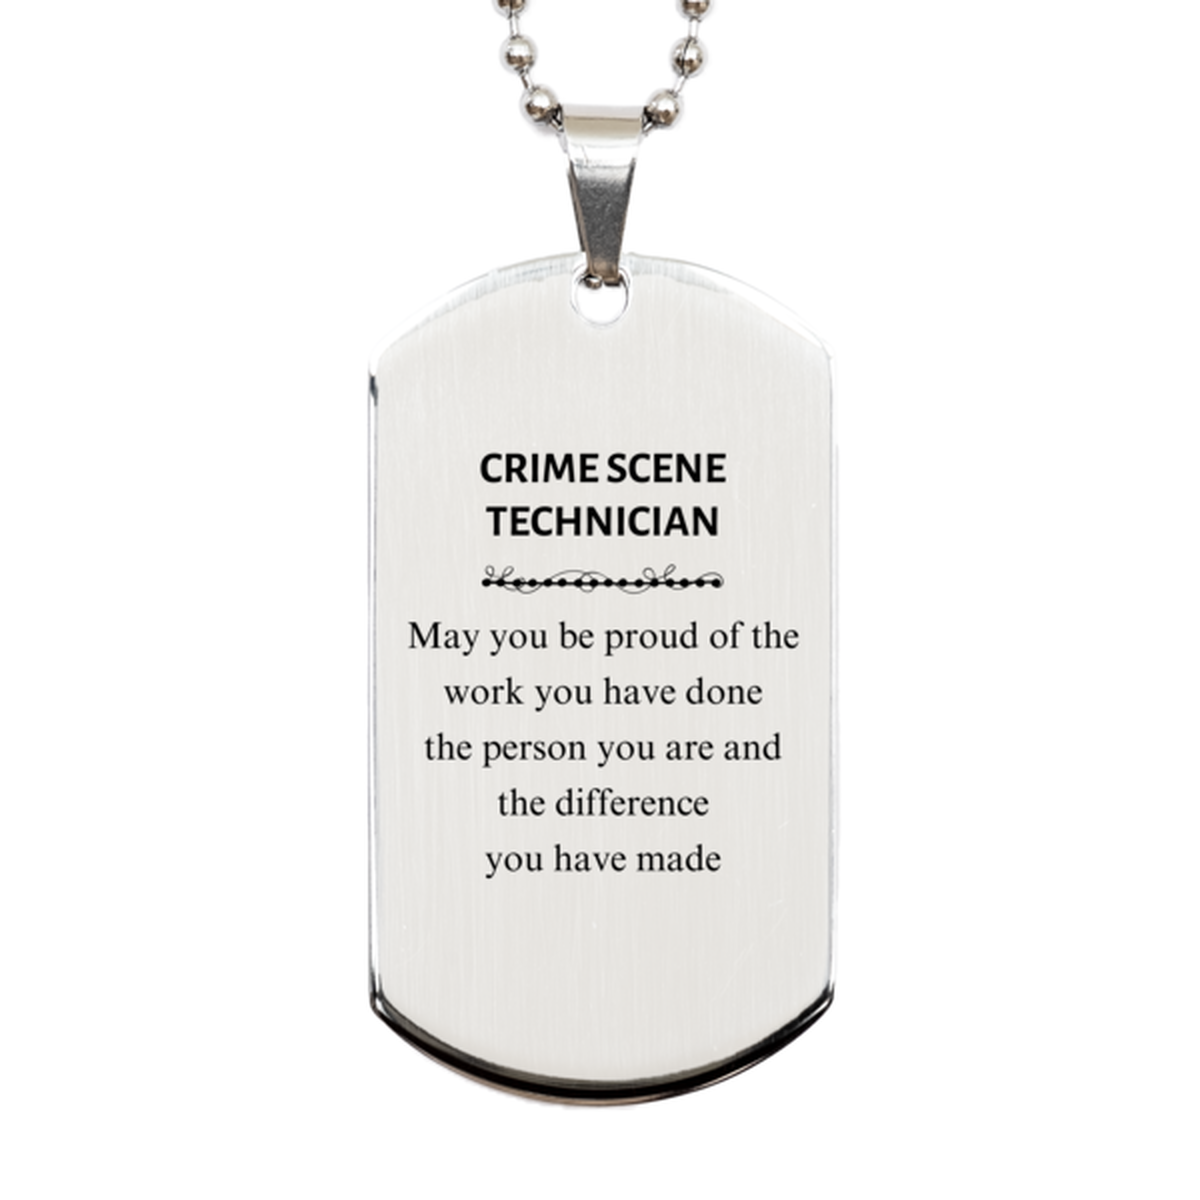 Crime Scene Technician May you be proud of the work you have done, Retirement Crime Scene Technician Silver Dog Tag for Colleague Appreciation Gifts Amazing for Crime Scene Technician